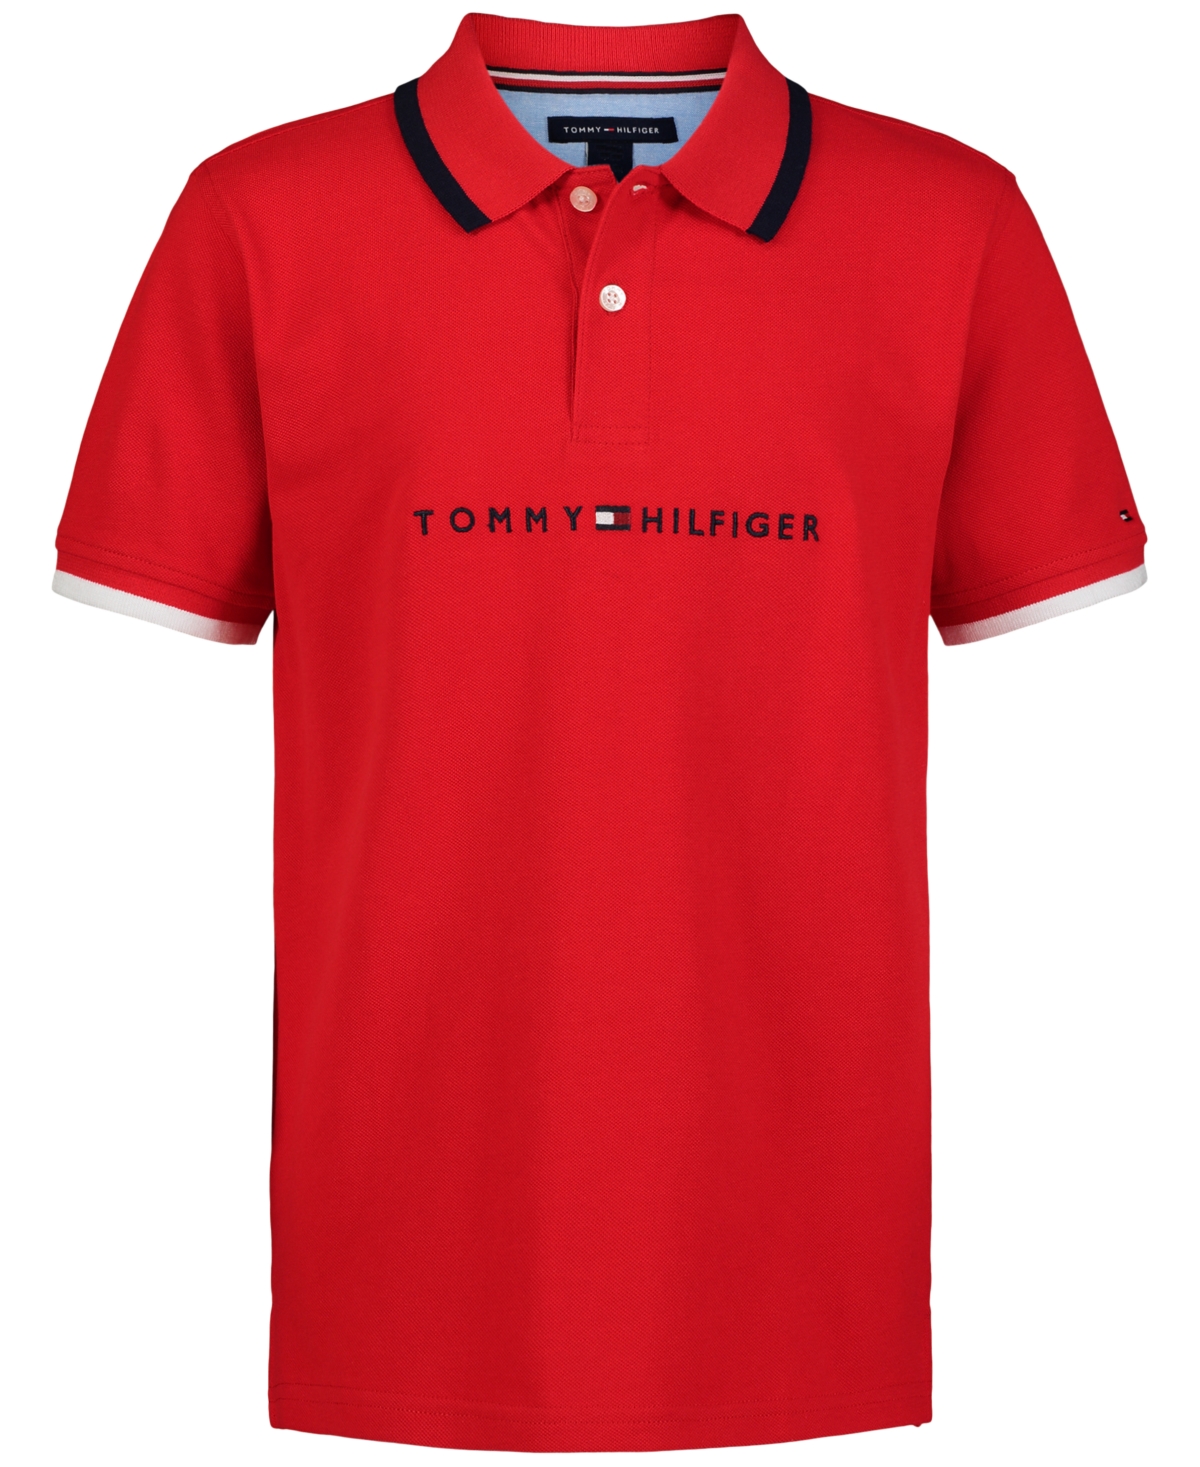 Tommy Hilfiger Kids' Big Boys Tomas Embroidered Logo Polo Shirt In Red